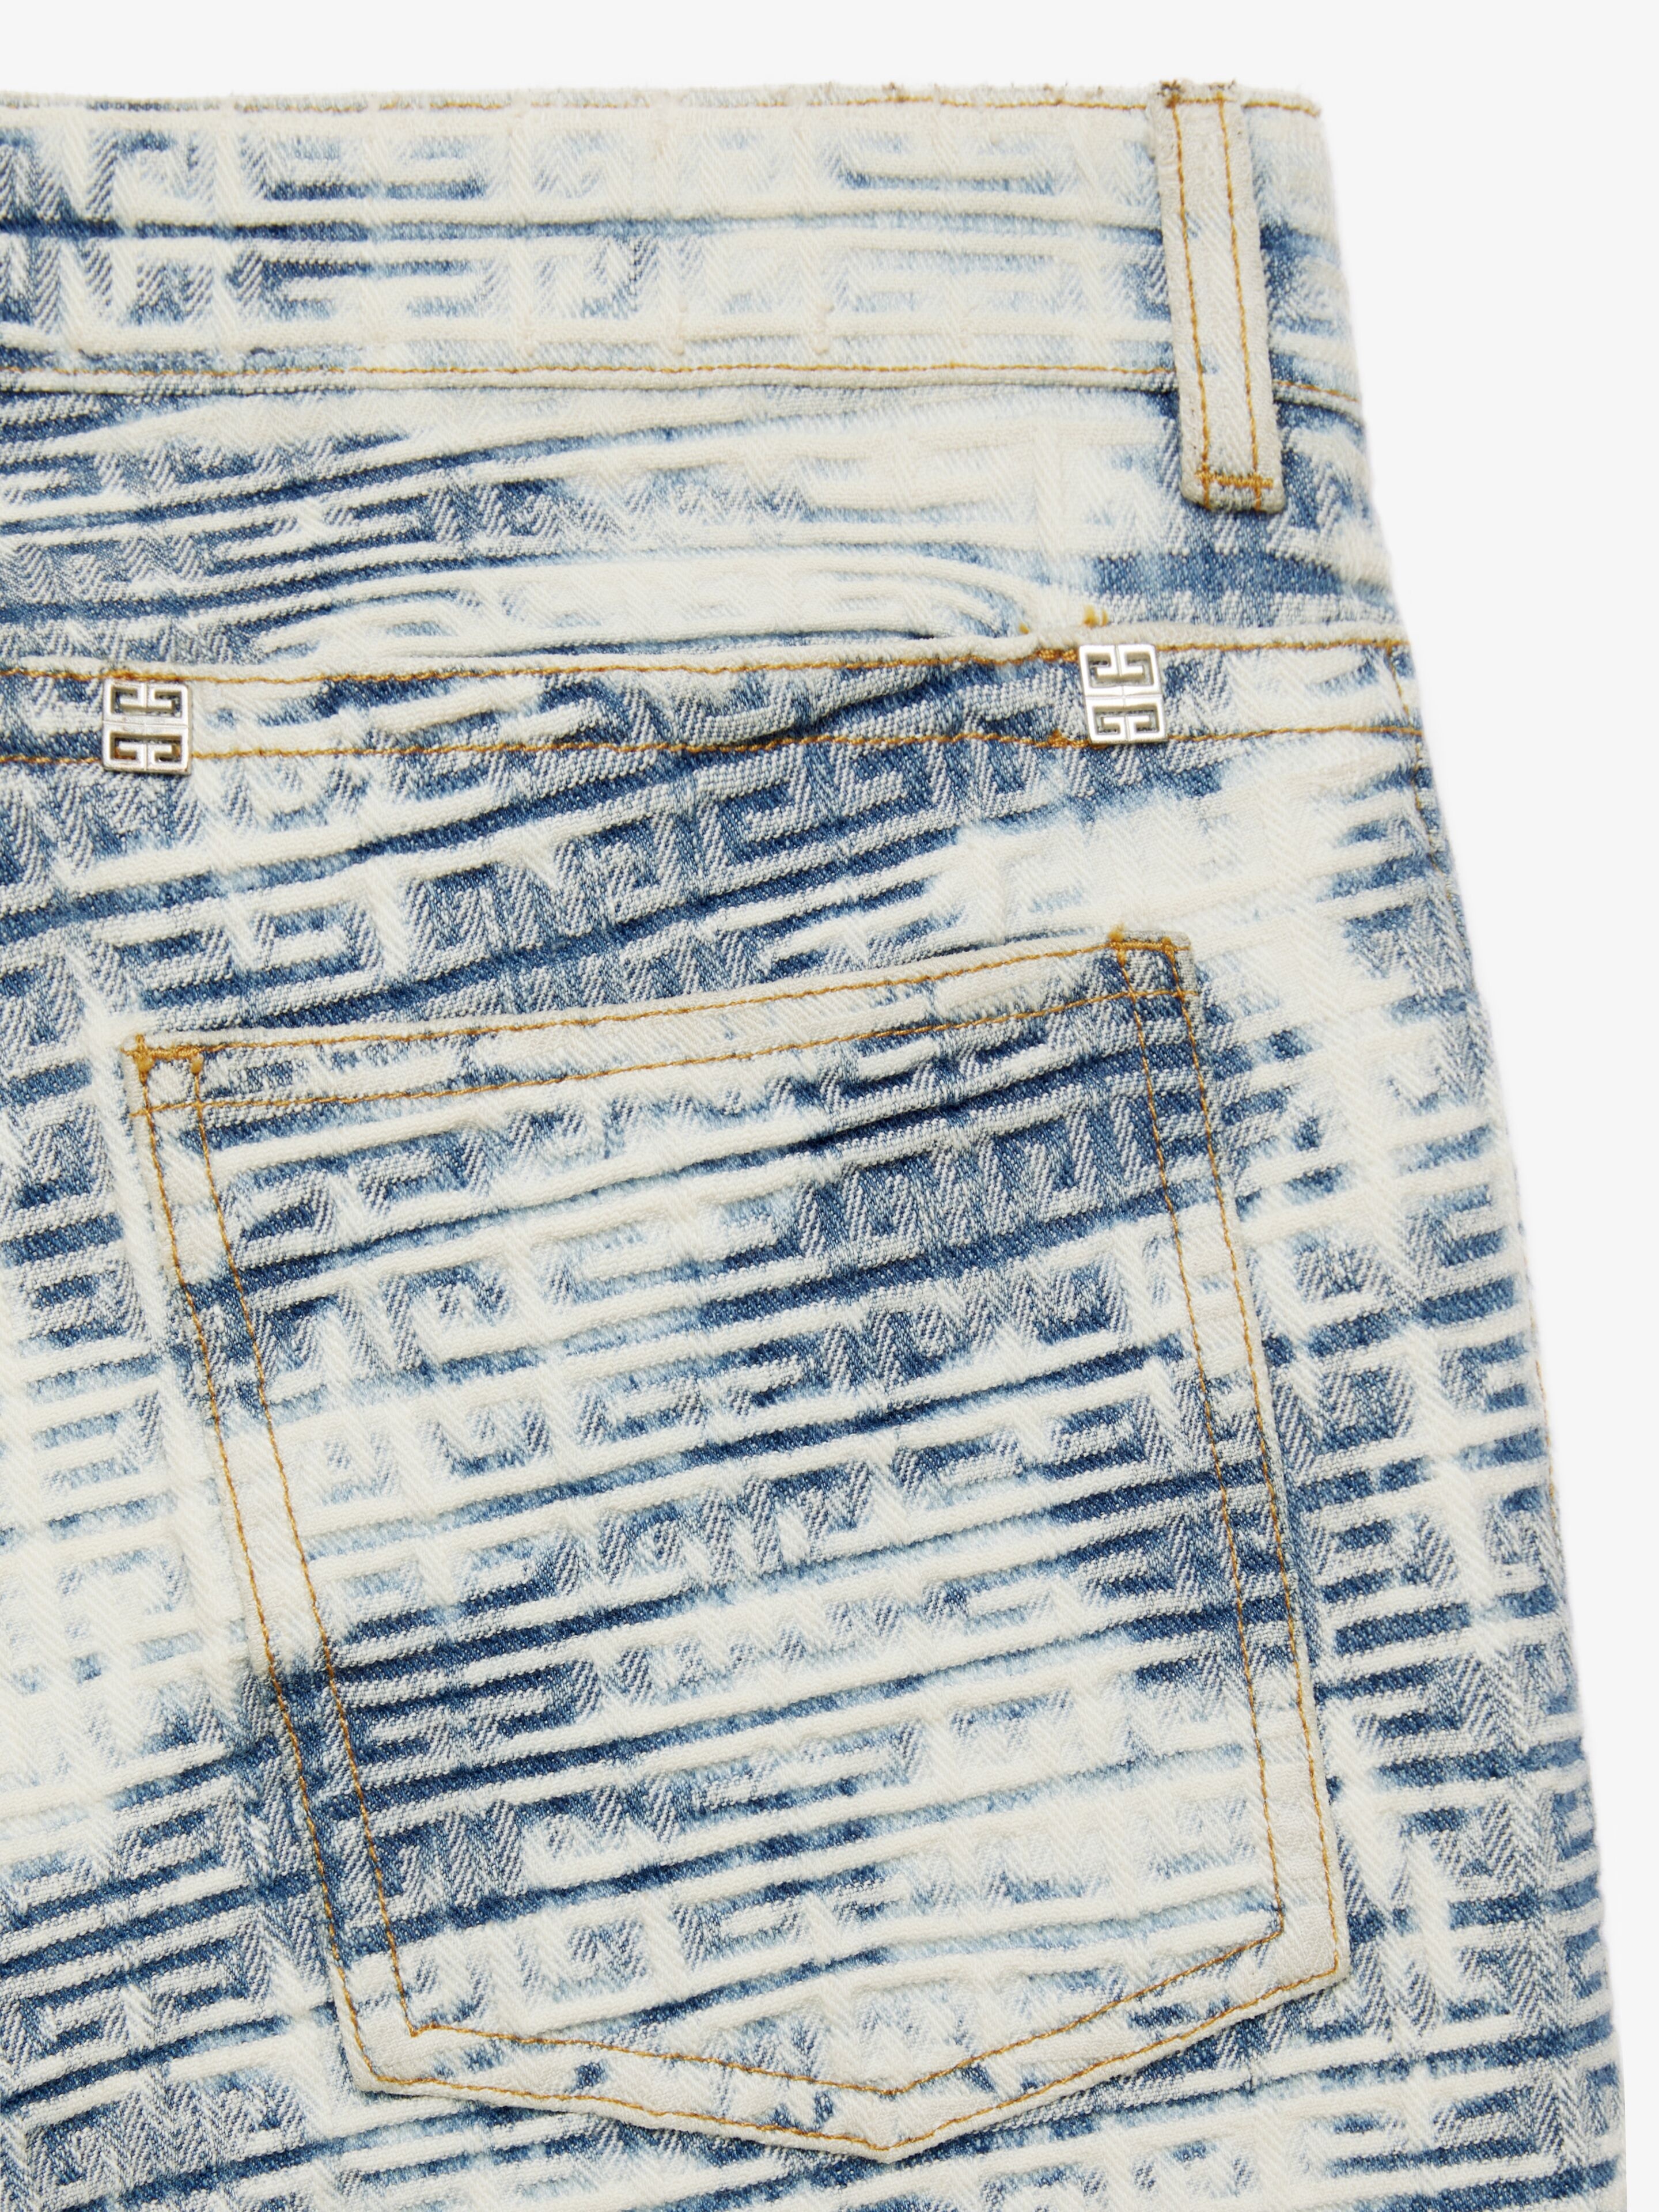 SKINNY JEANS IN 4G BLEACHED DENIM WITH ZIPPERS - 5